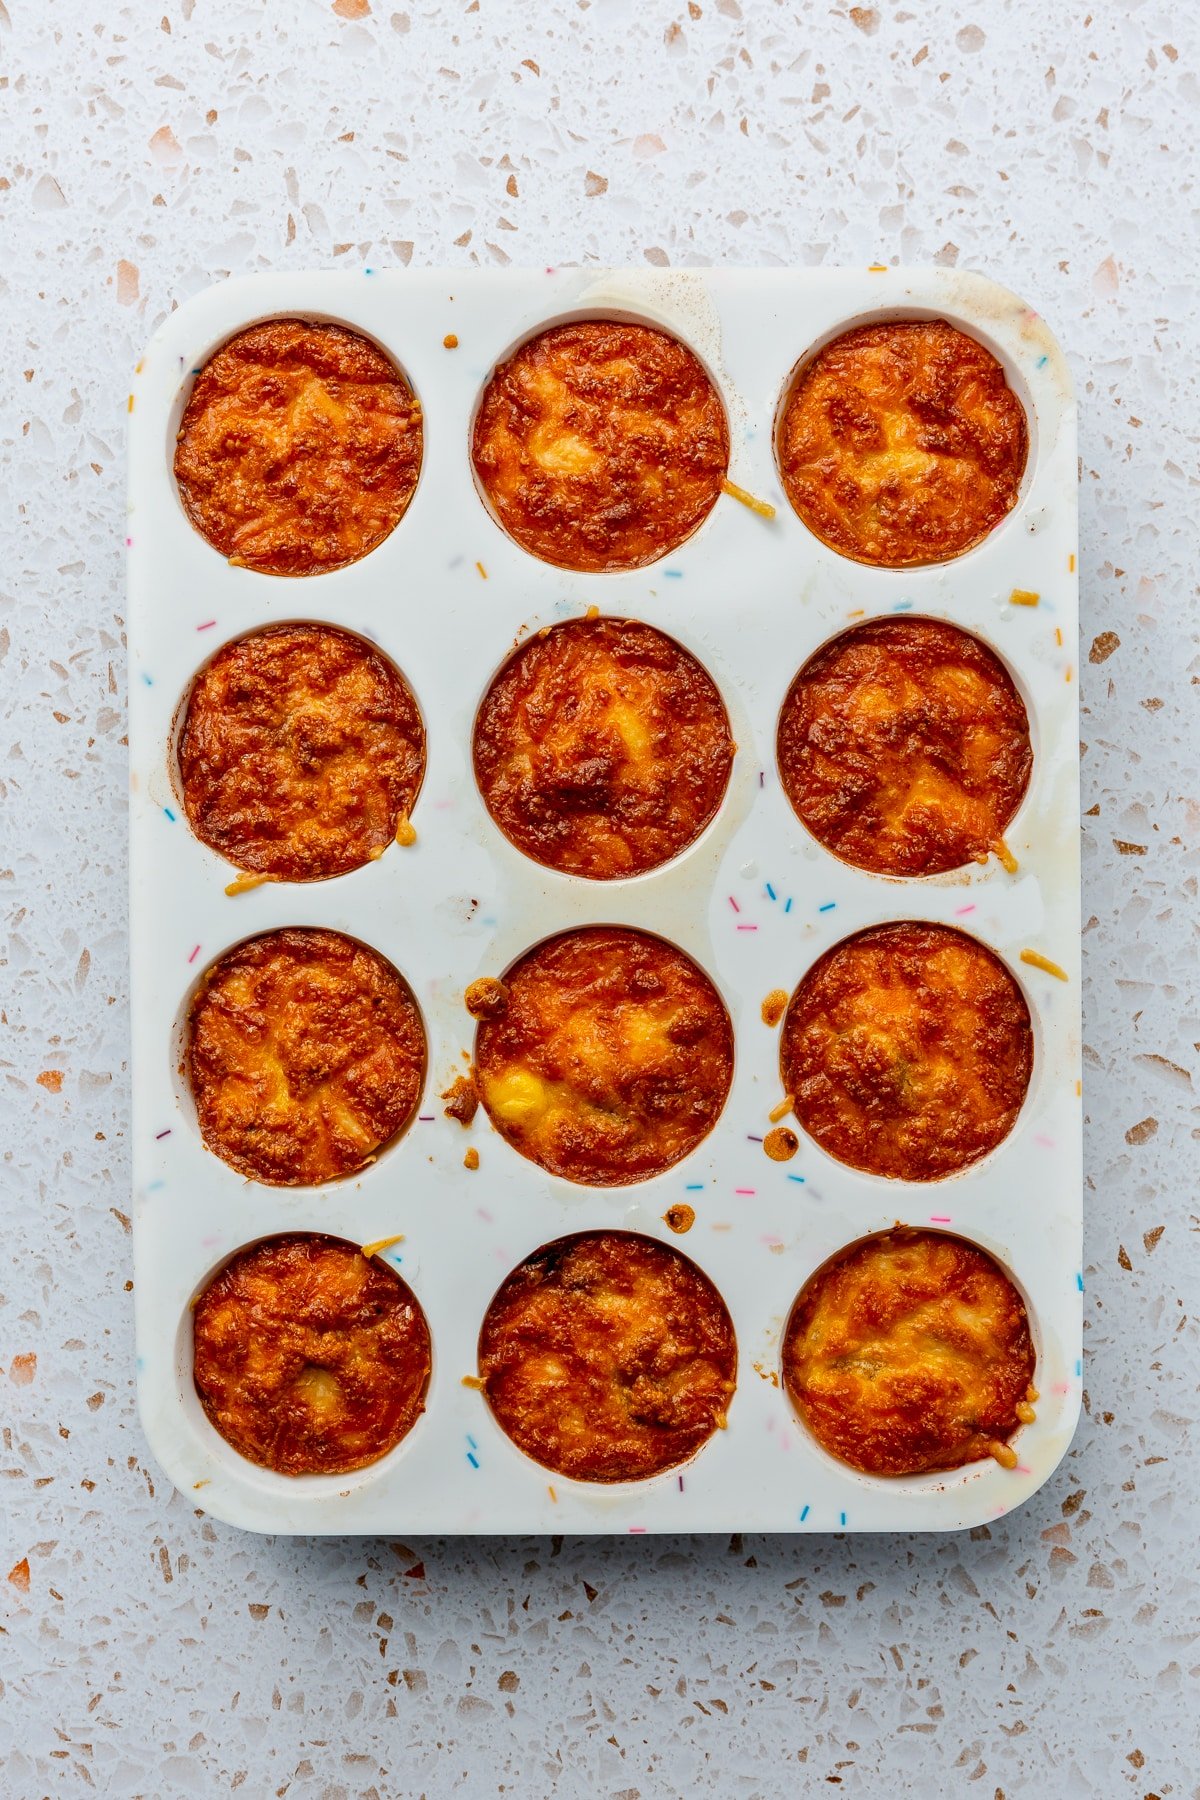 Fully baked and browned egg bites sit in a white, silicone muffin tray.